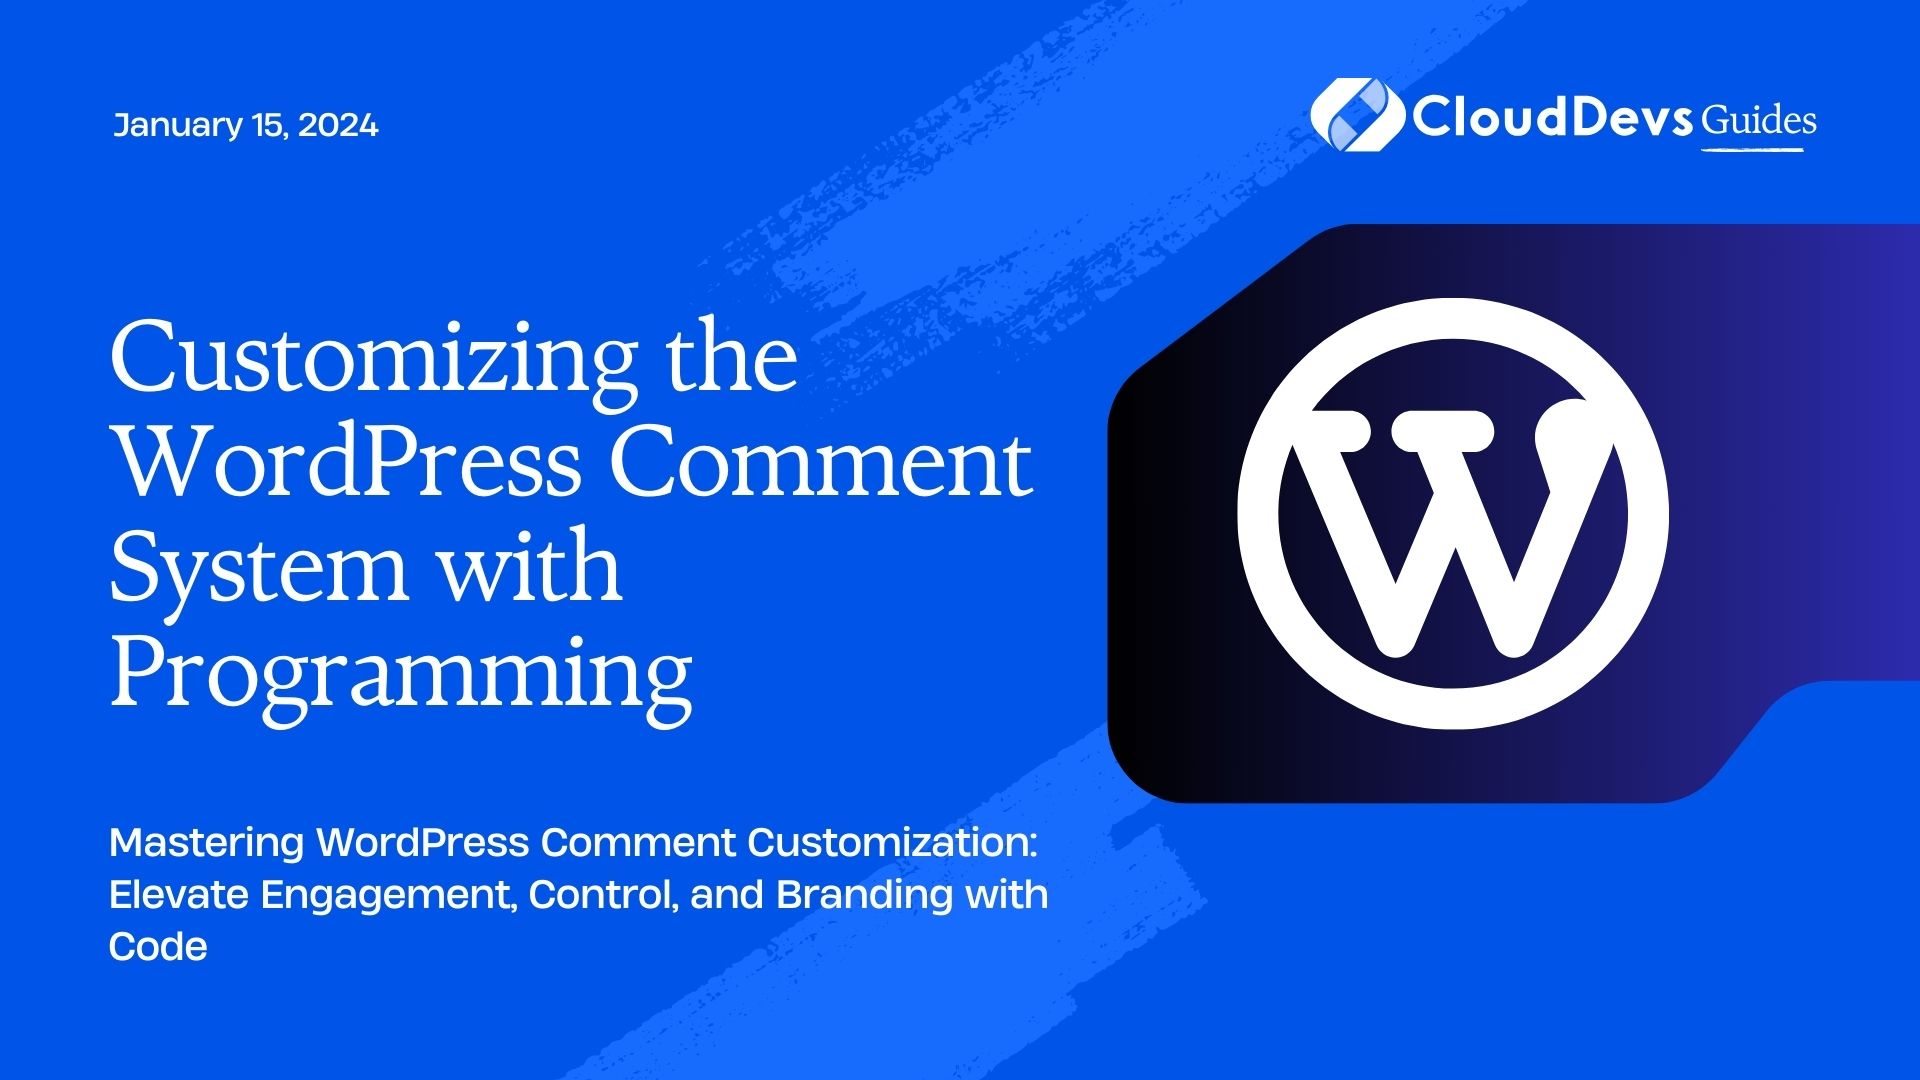 Customizing the WordPress Comment System with Programming